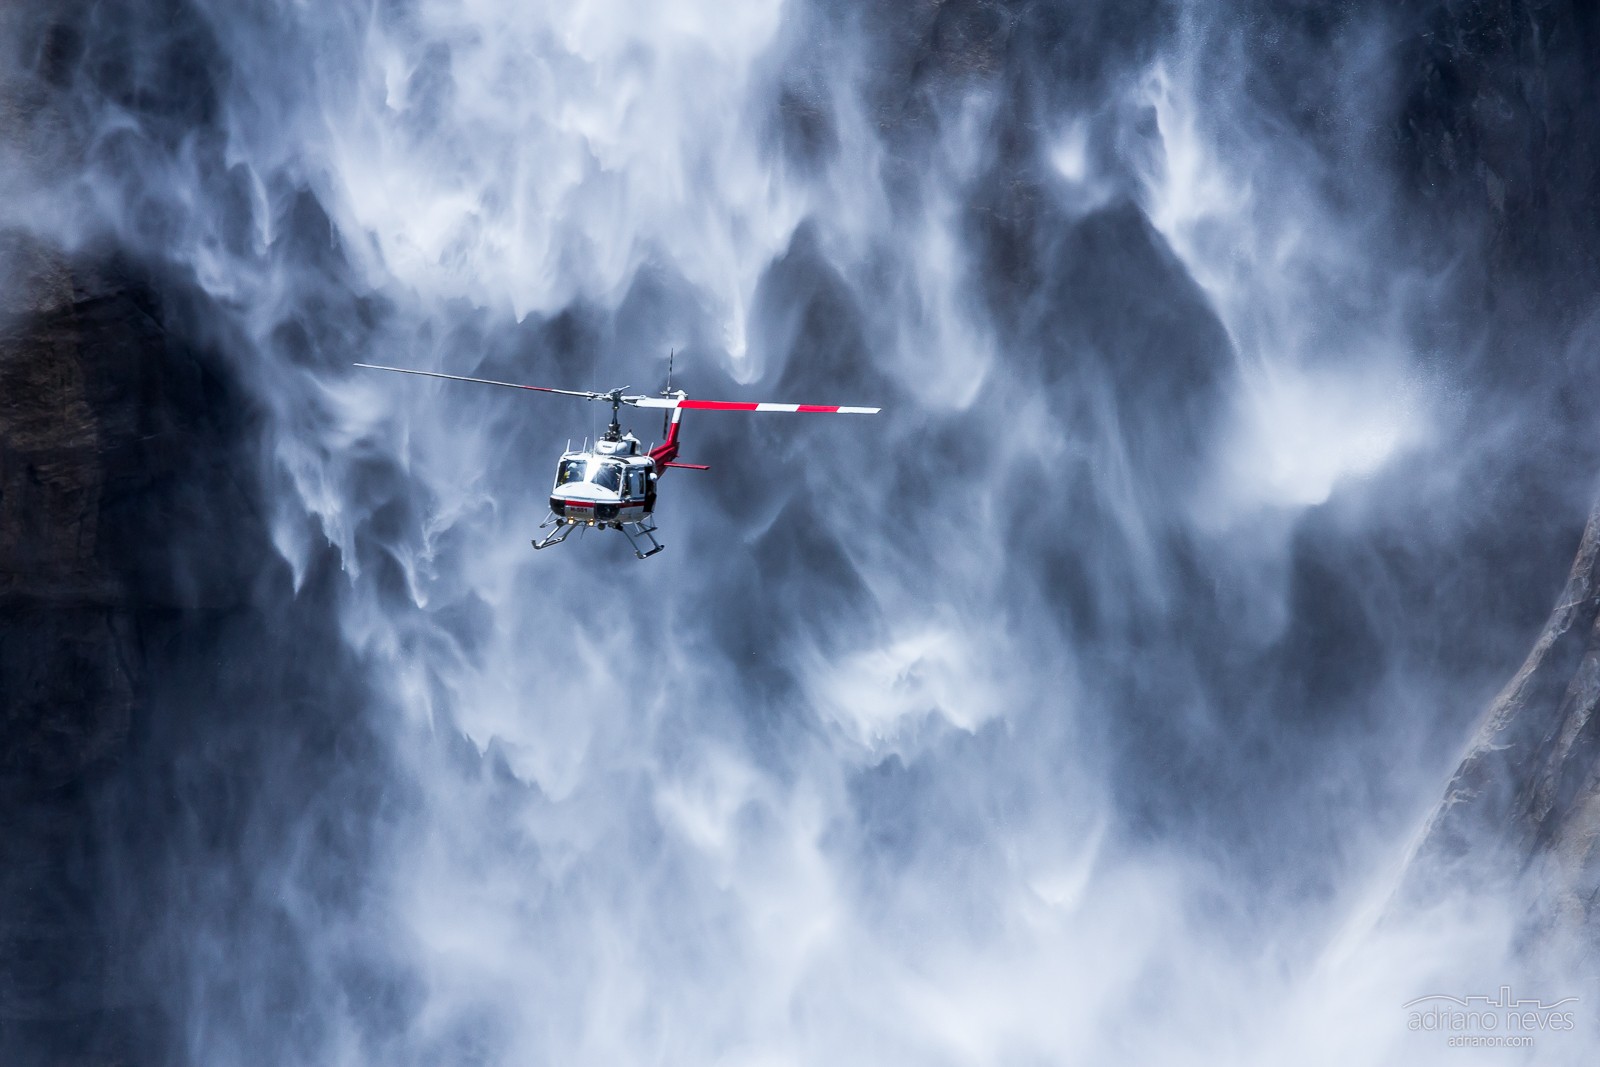 Search & rescue helicopter near Yosemite waterfall, USA by Adriano Neves